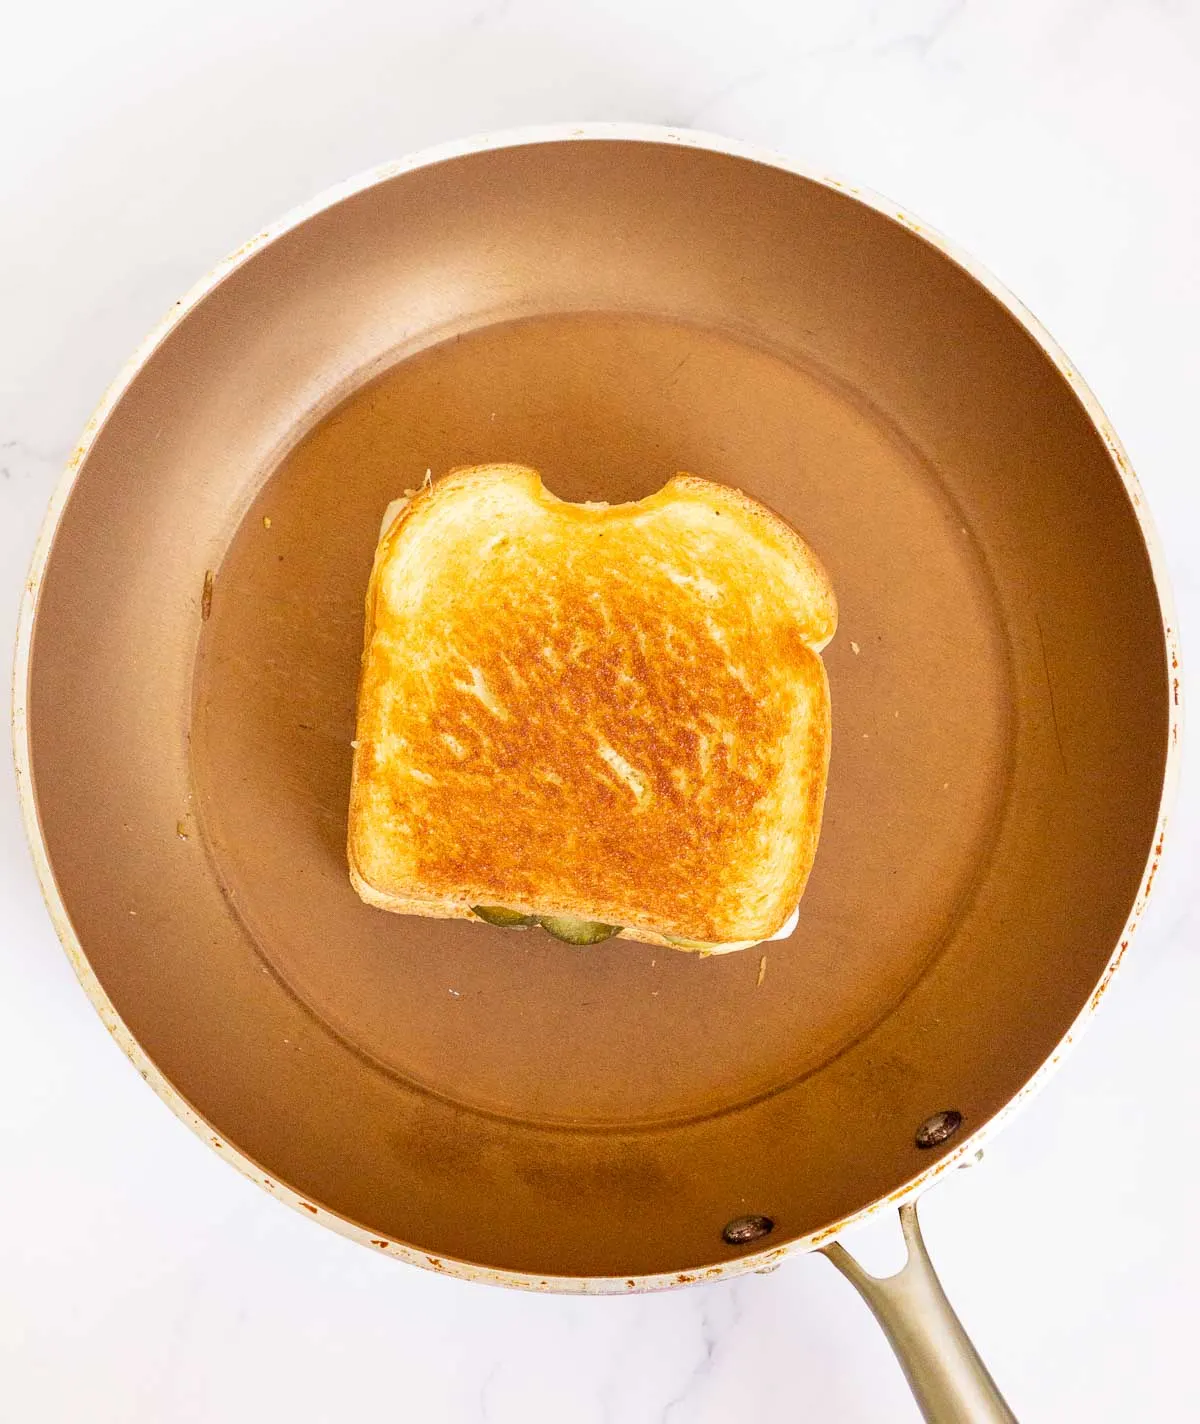 Grilled cheese sandwich toasting in a pan